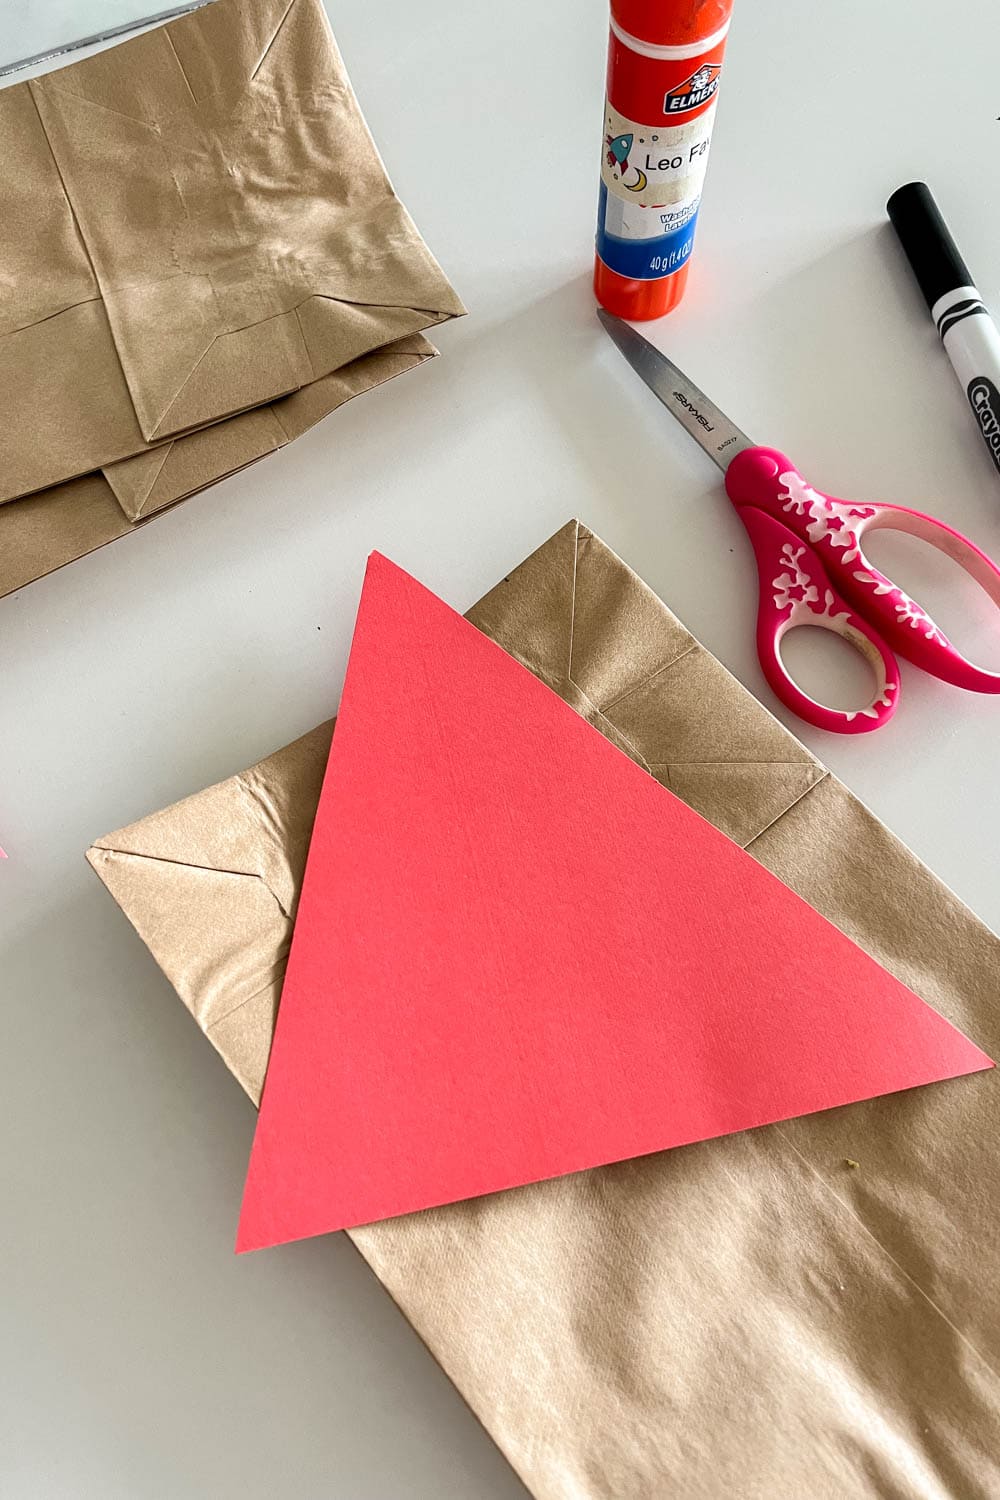 Cutting out a cardstock triangle for the paper bag scare crow's hat